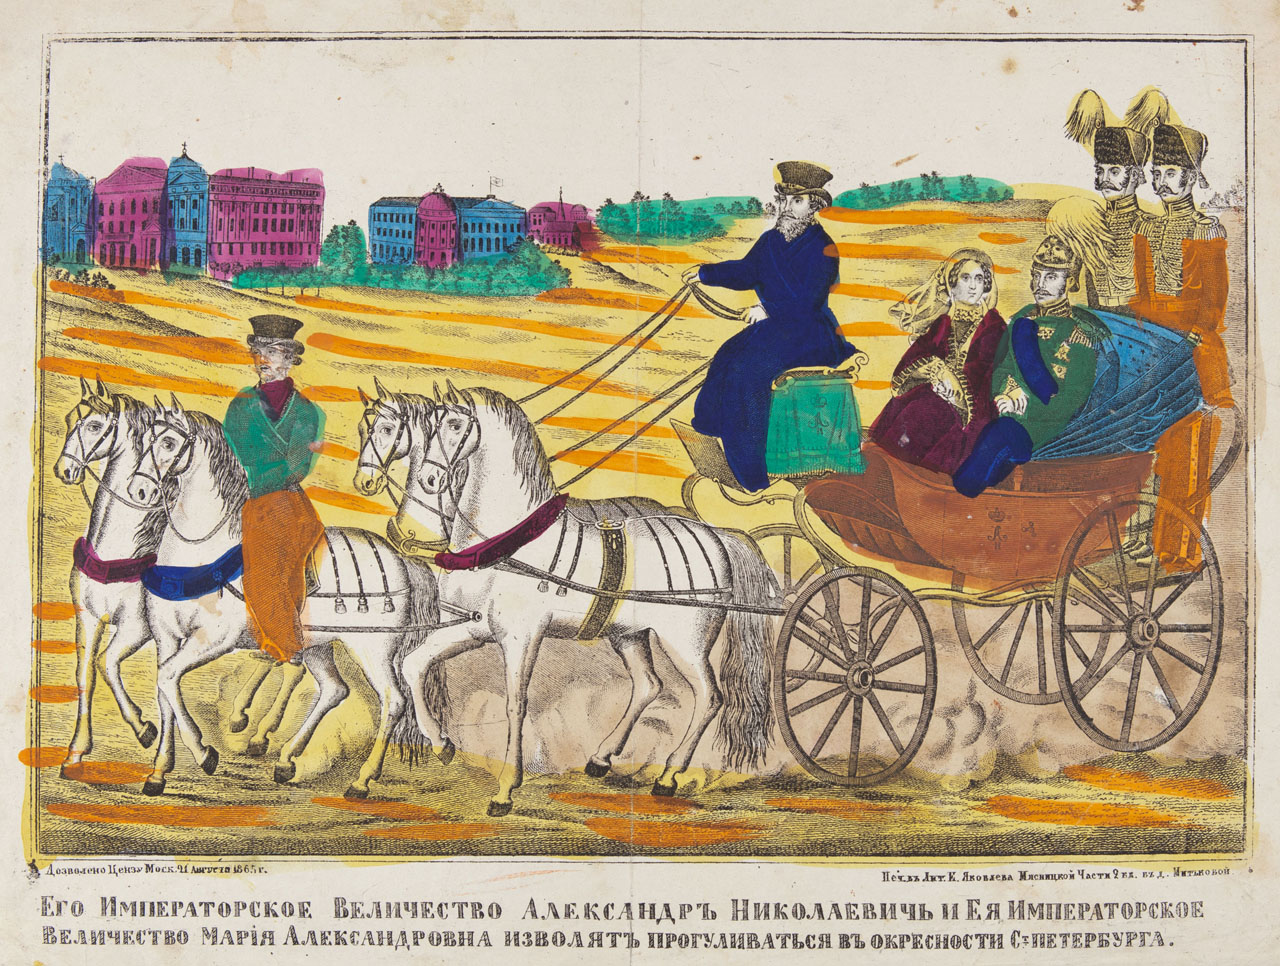 Recurring themes acquired modern details. Today, they give an insight into court life and how lubok was influenced by contemporary art. // Emperor Alexander II and family riding in a carriage near St. Petersburg; 1865